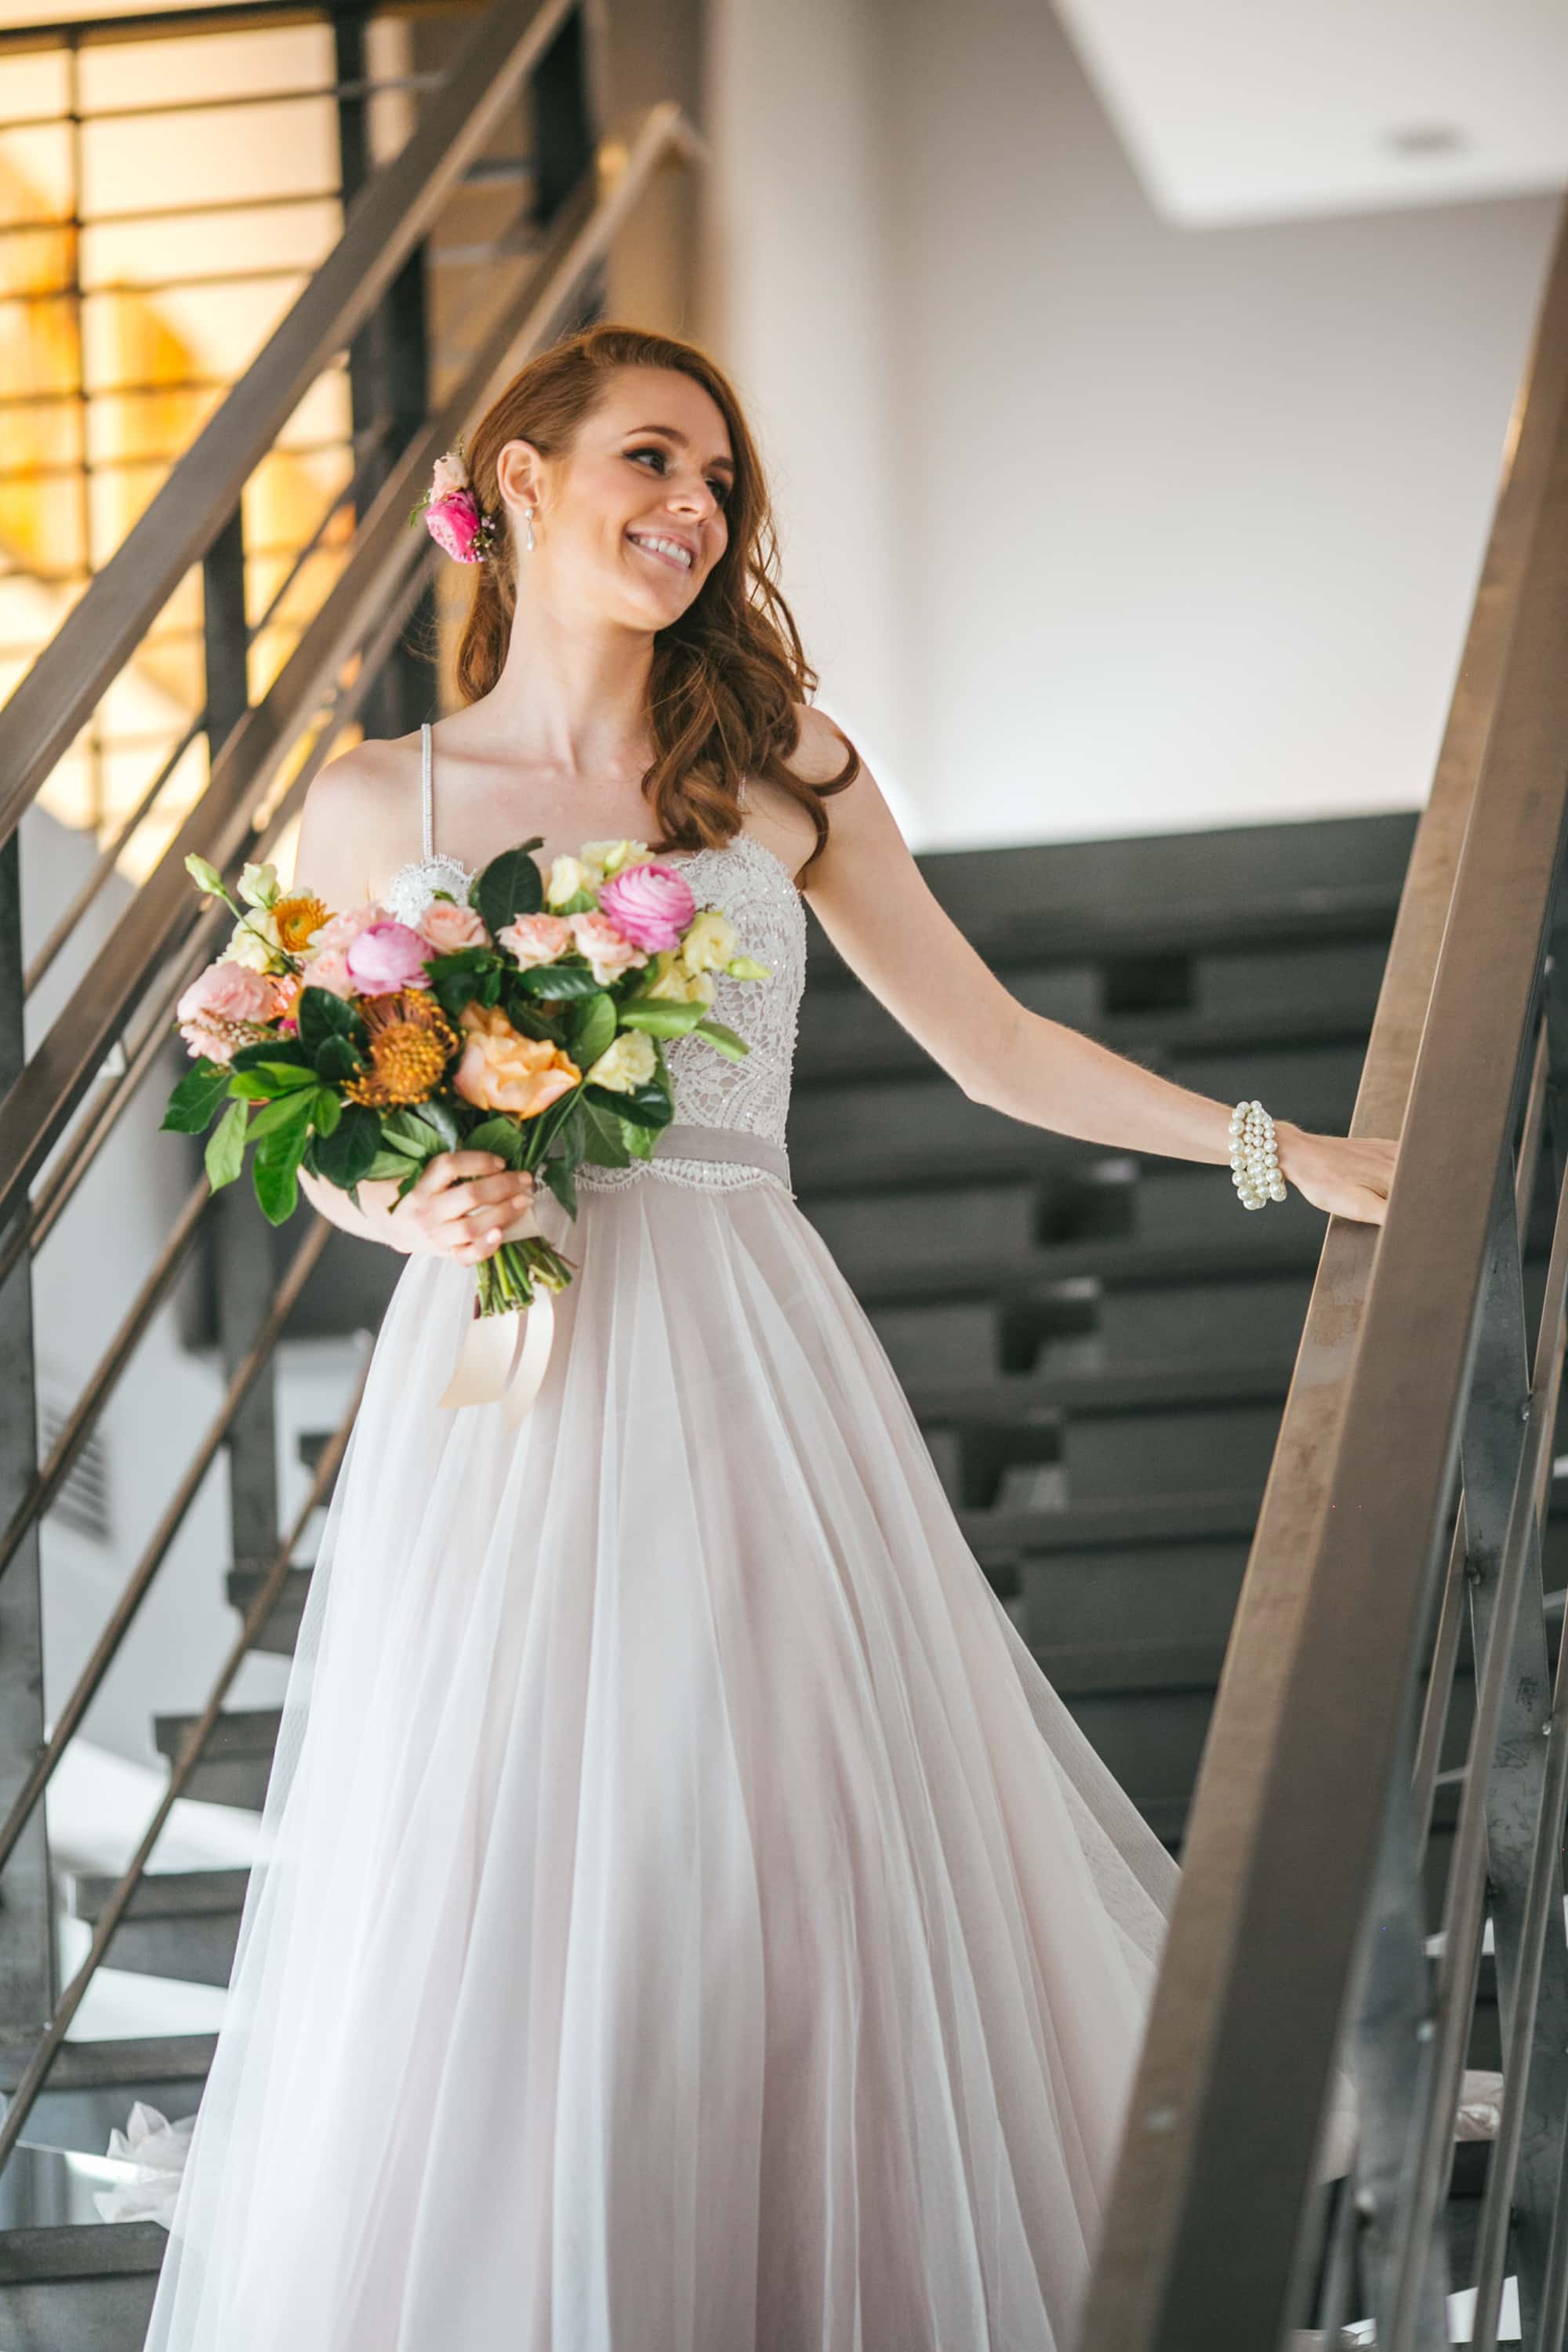 bride coming down stairs, flowy wedding dress, colorful wedding flowers, colorful bouquet, red haired bride, space gallery denver wedding, bride walking down aisle, denver wedding venue, denver wedding photographer, red haired bride